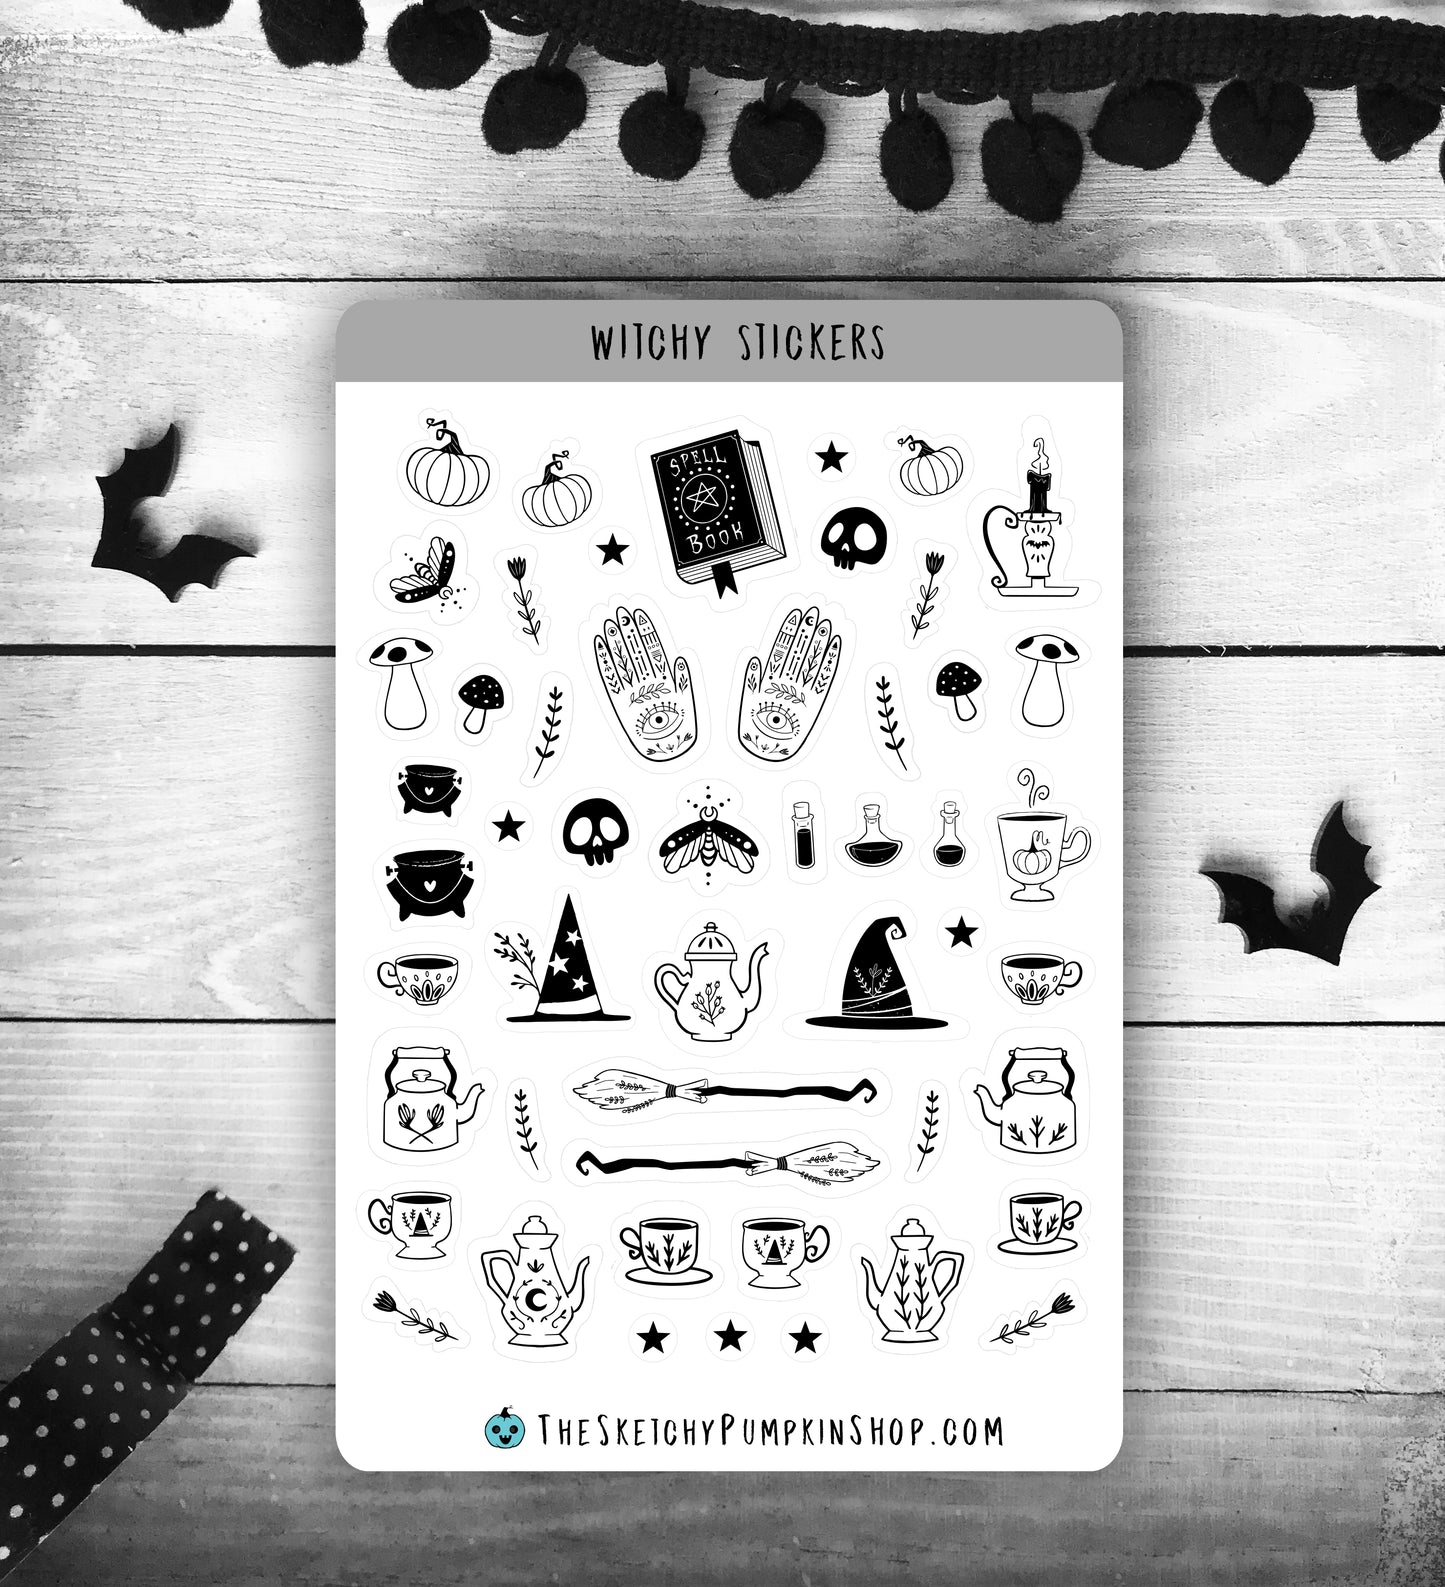 Witchy Stickers, Witchy, Coven, Sabbat, transparent, bullet journal